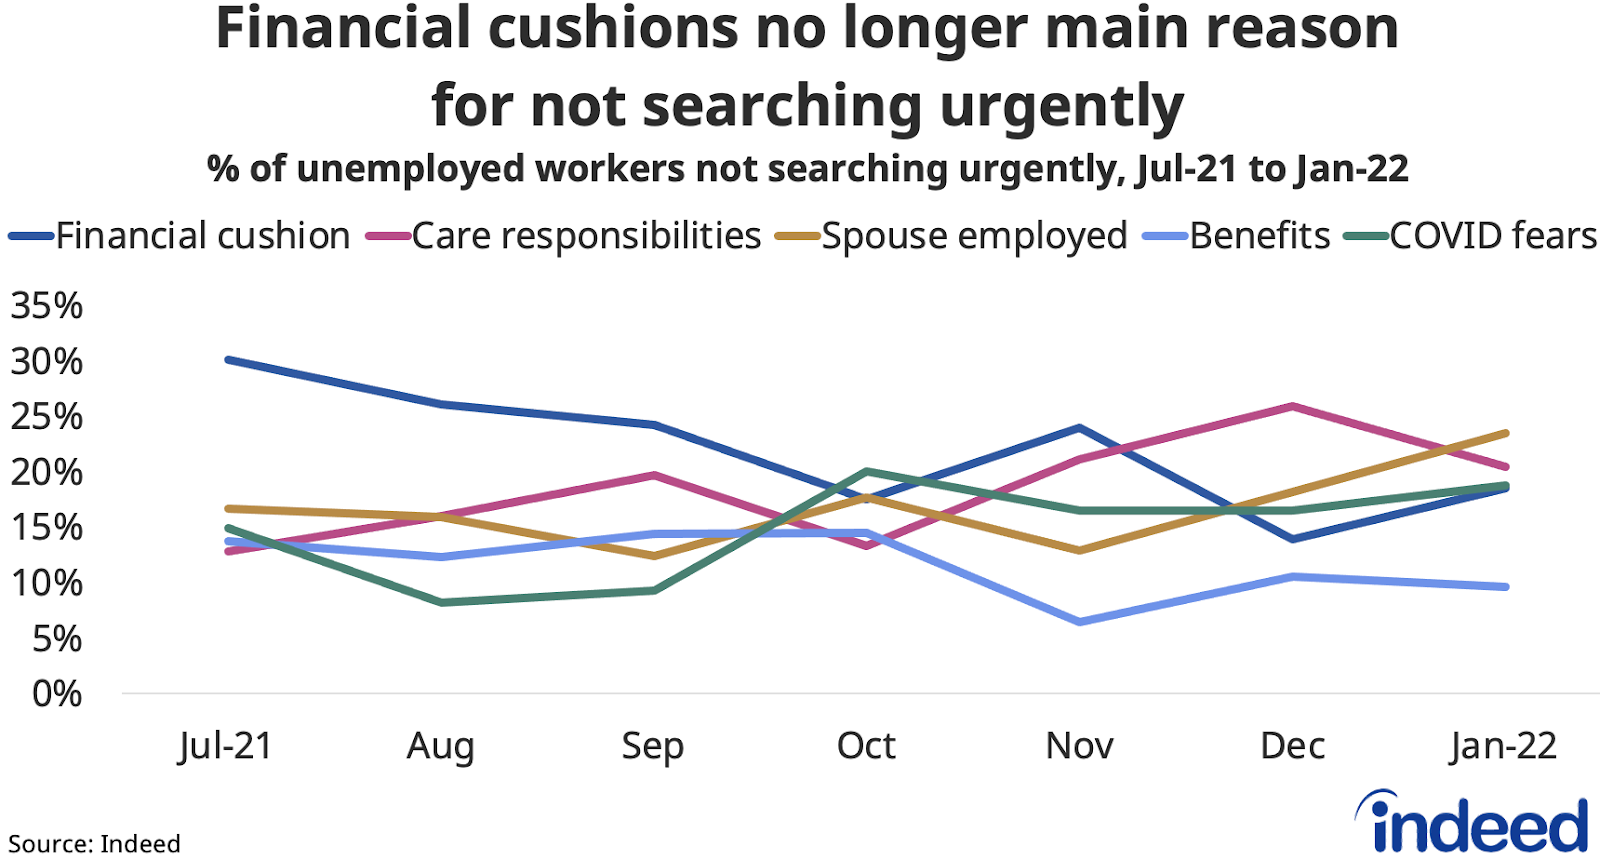 Line chart titled “Financial cushions no longer main reason for not searching urgently.”